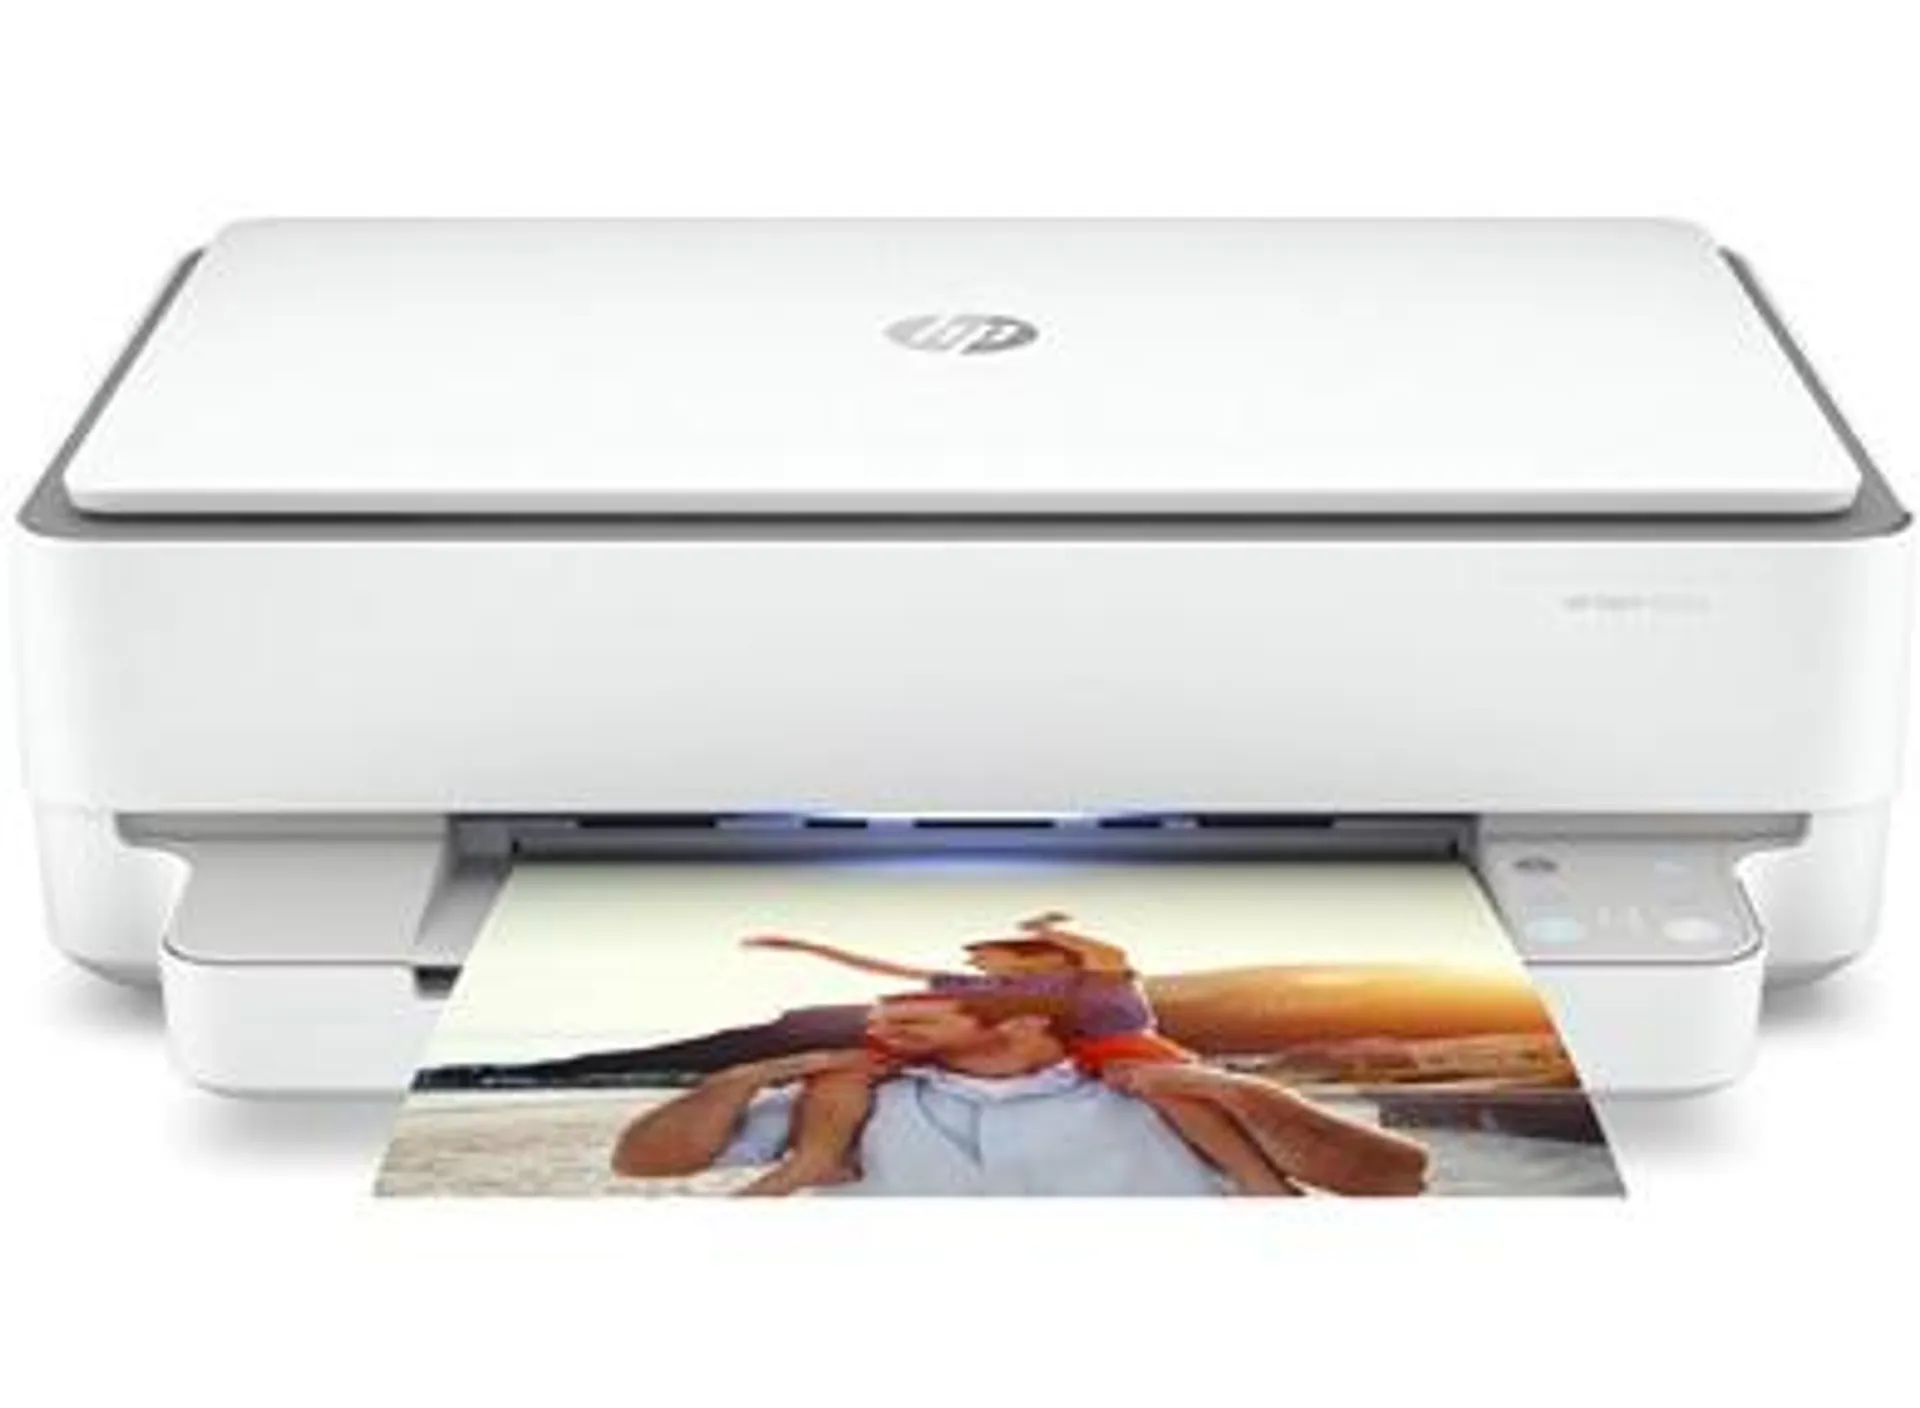 HP Envy 6032e All-in-One HP+ enabled Wireless Colour Printer with 6 Months Instant Ink